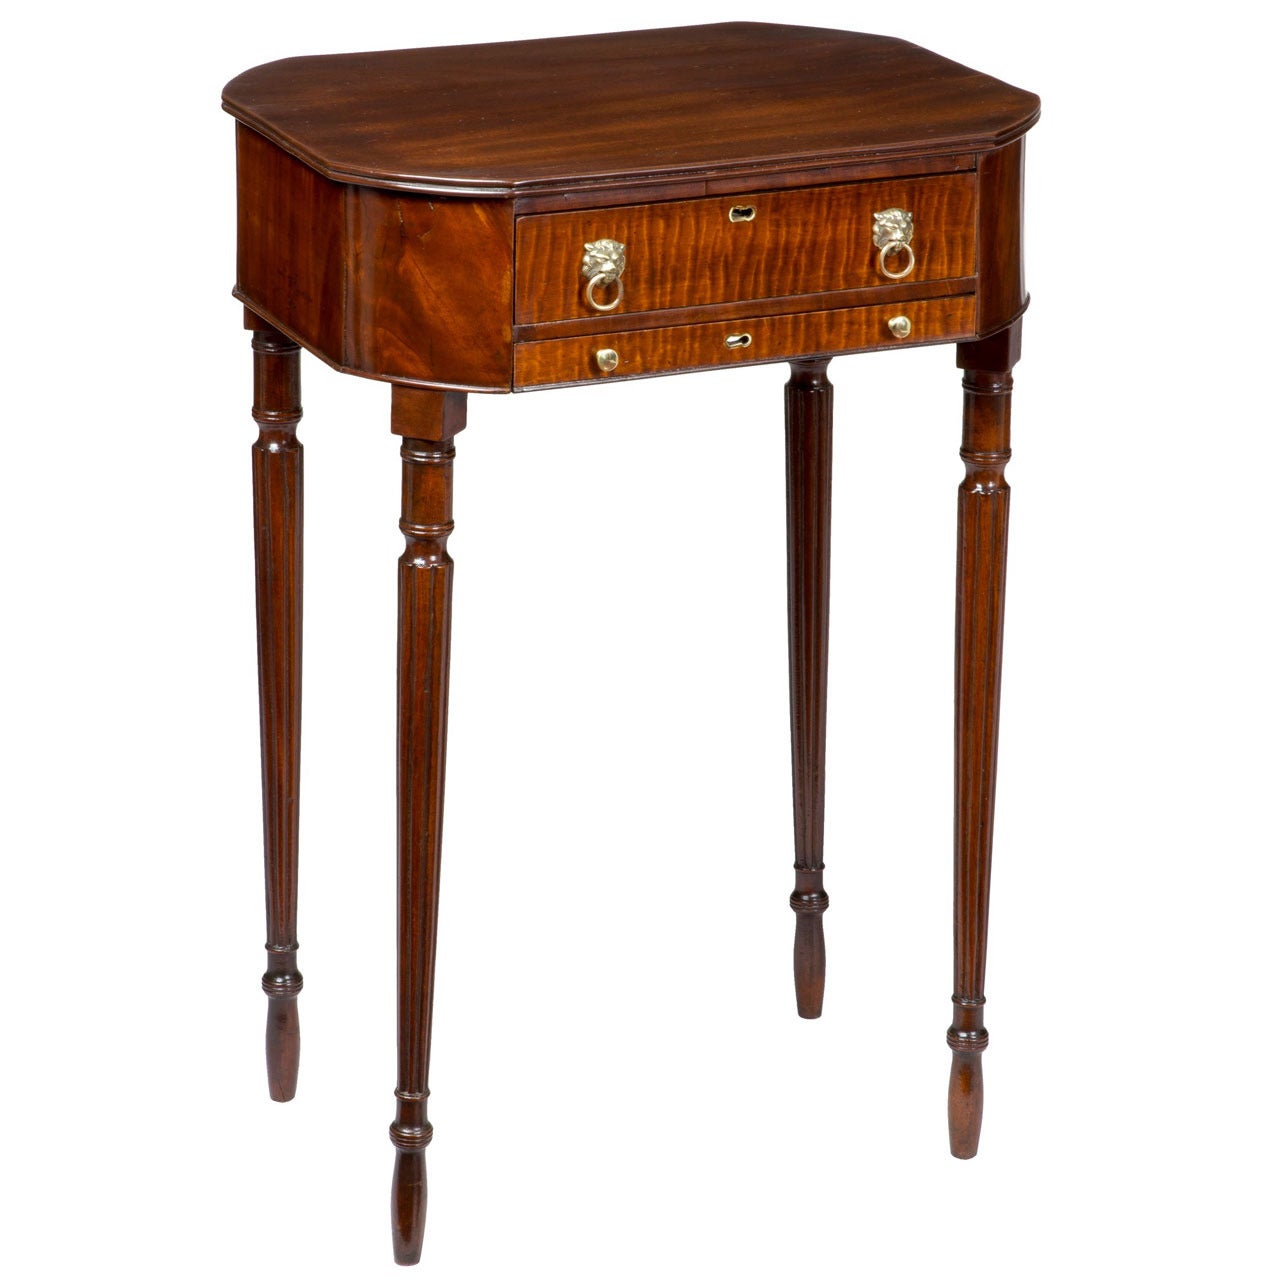 A Mahogany and Tiger Maple Octagonal Sheraton Sewing Table, Salem, MA, c.1800 attributed to Nehemiah Adams